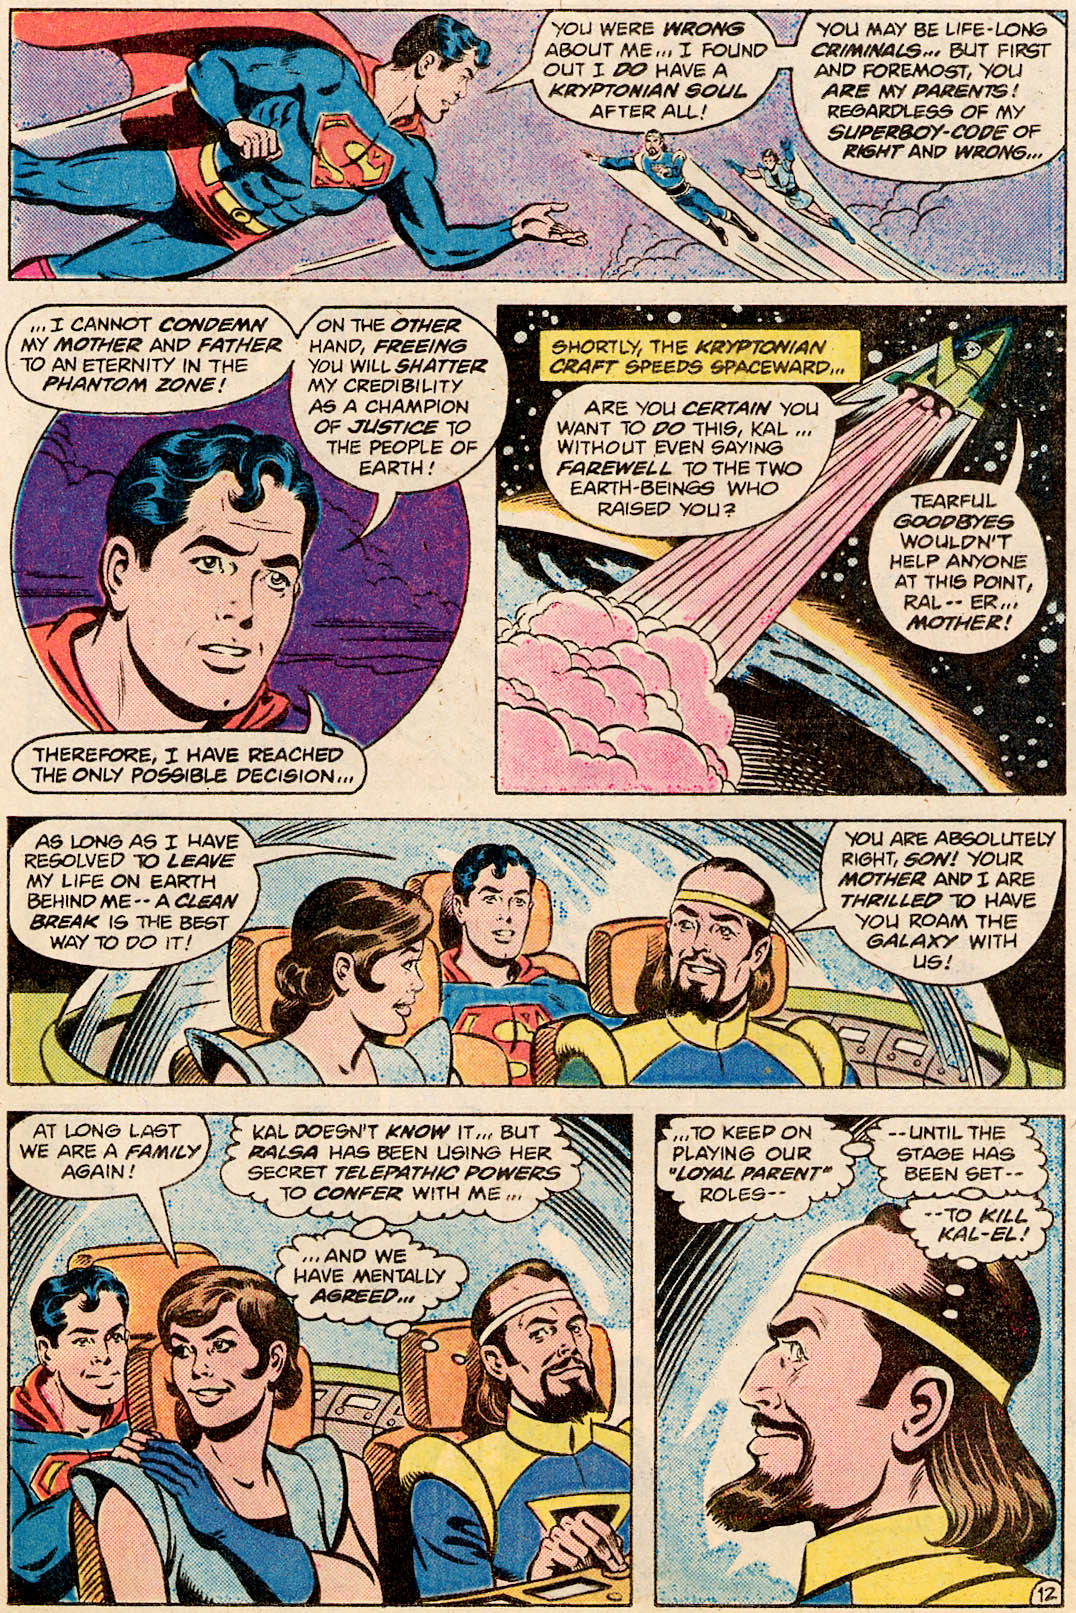 The New Adventures of Superboy 28 Page 12